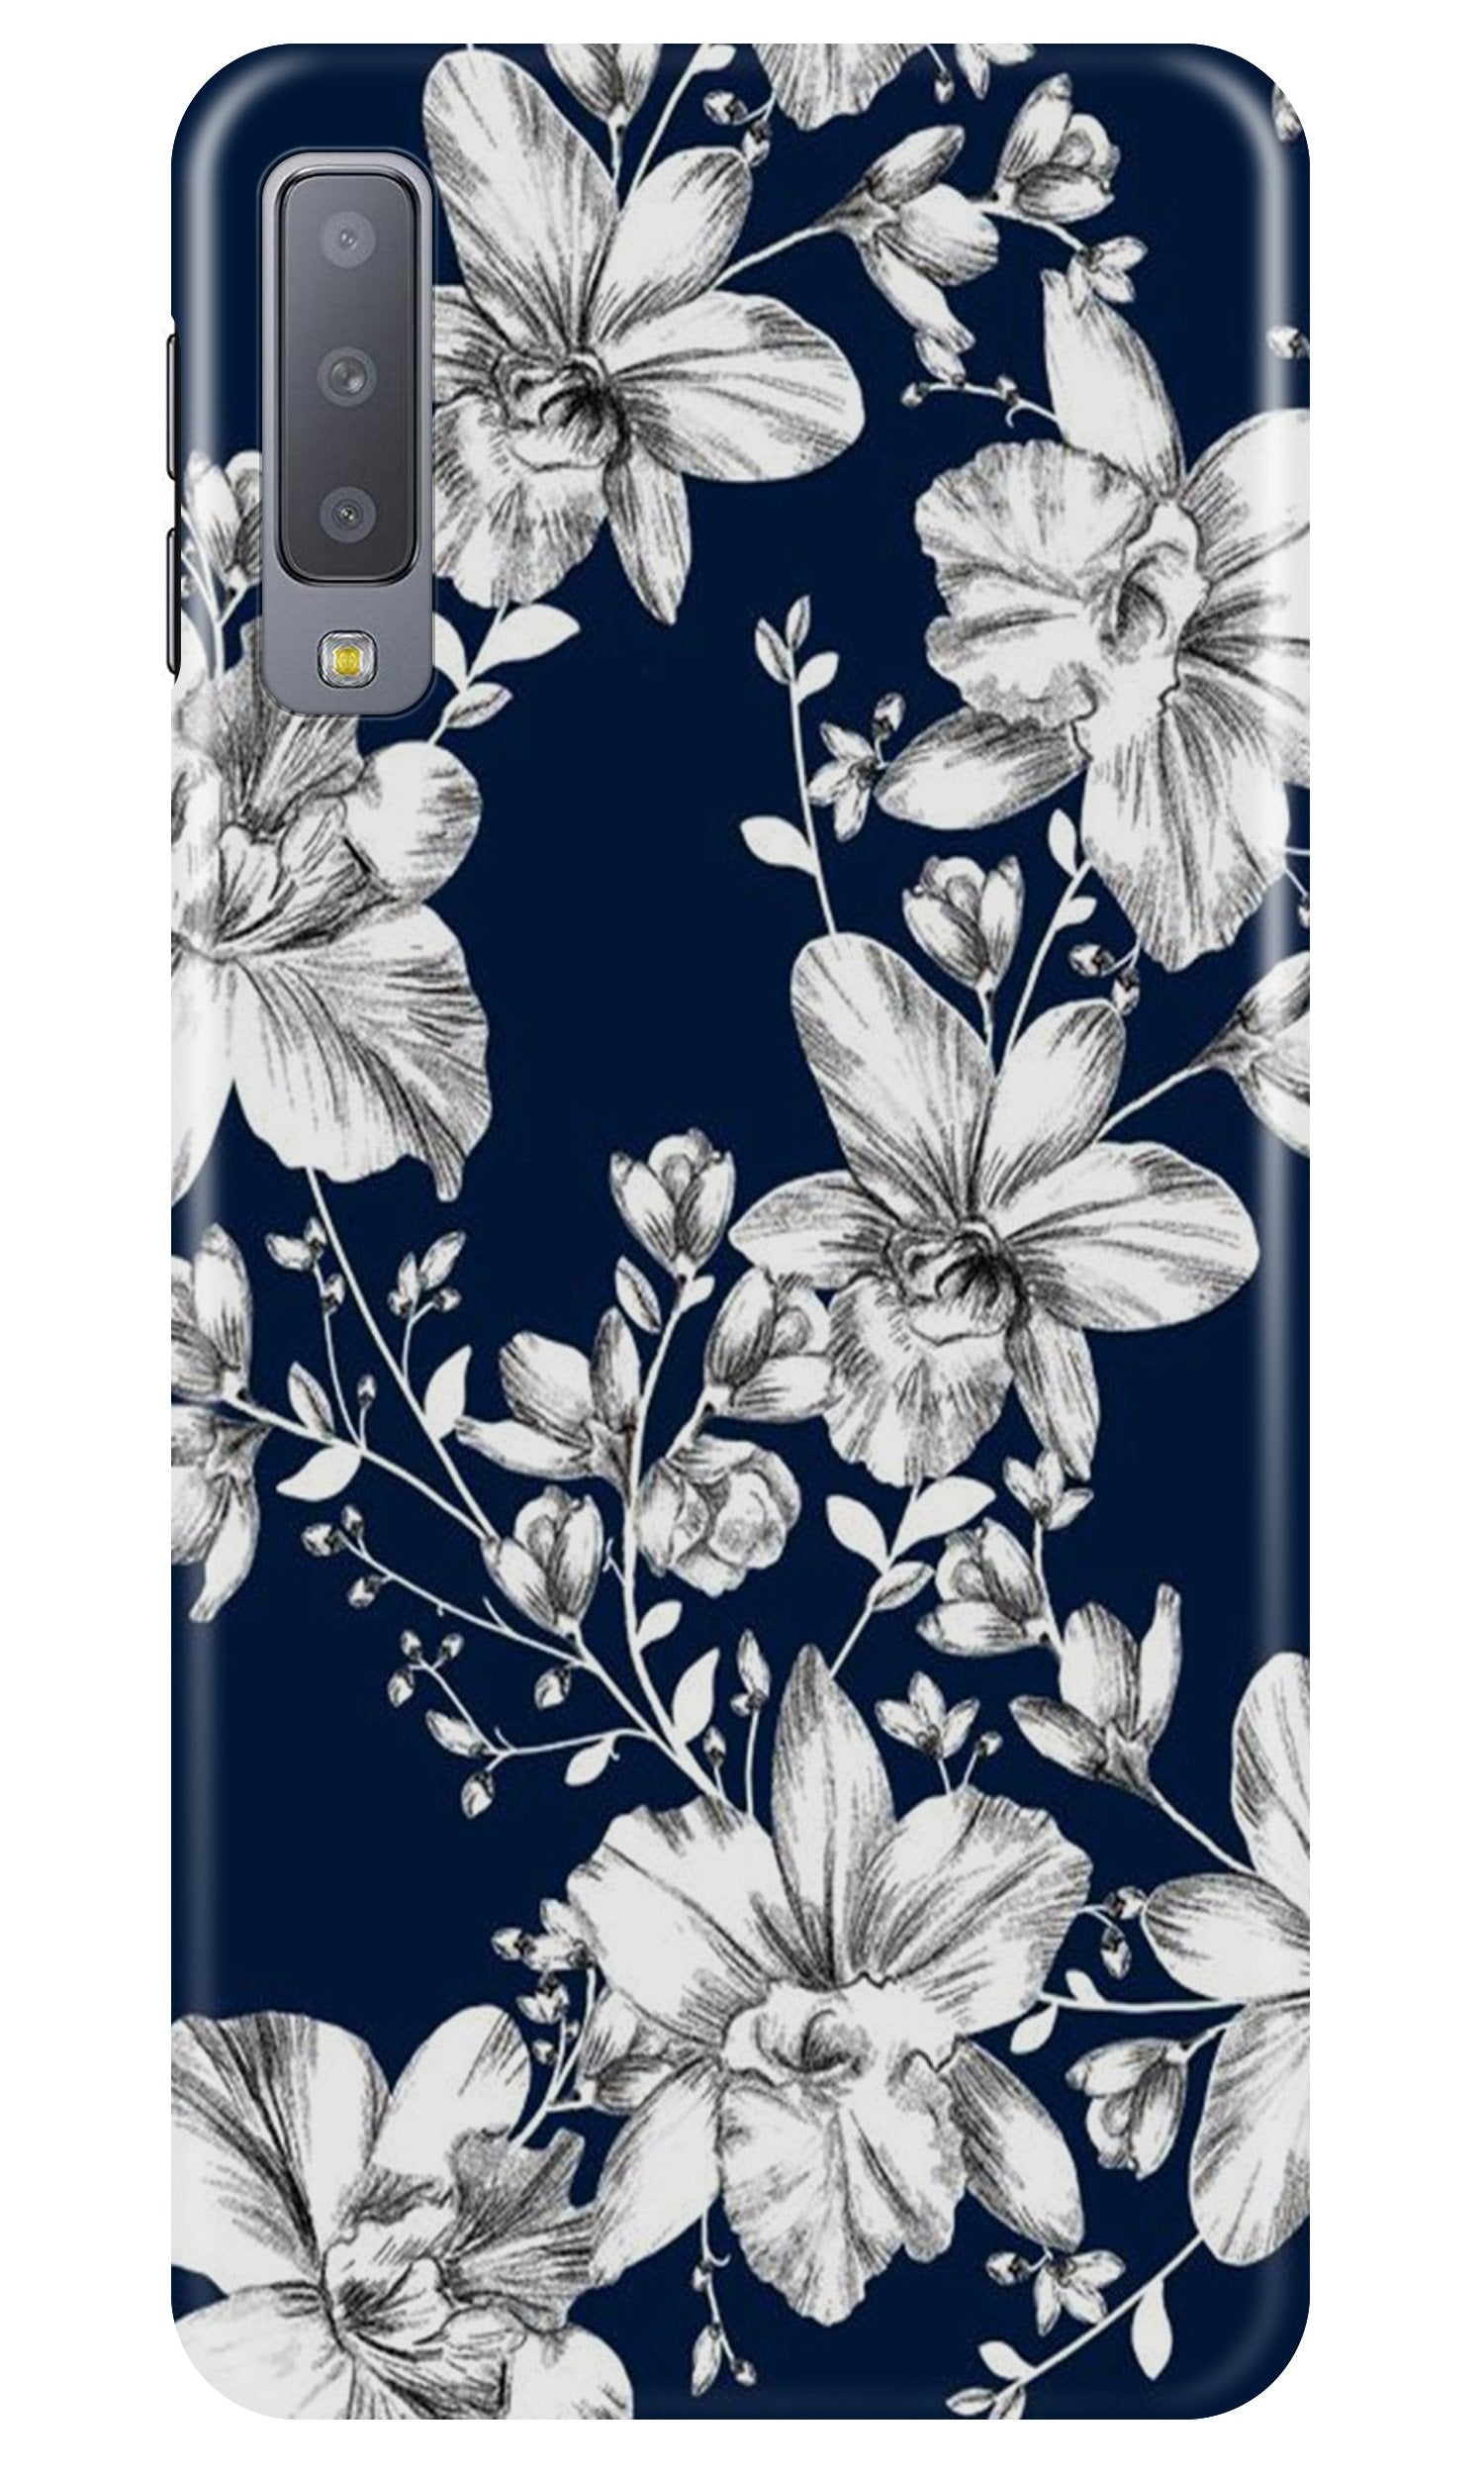 White flowers Blue Background Case for Samung Galaxy A70s